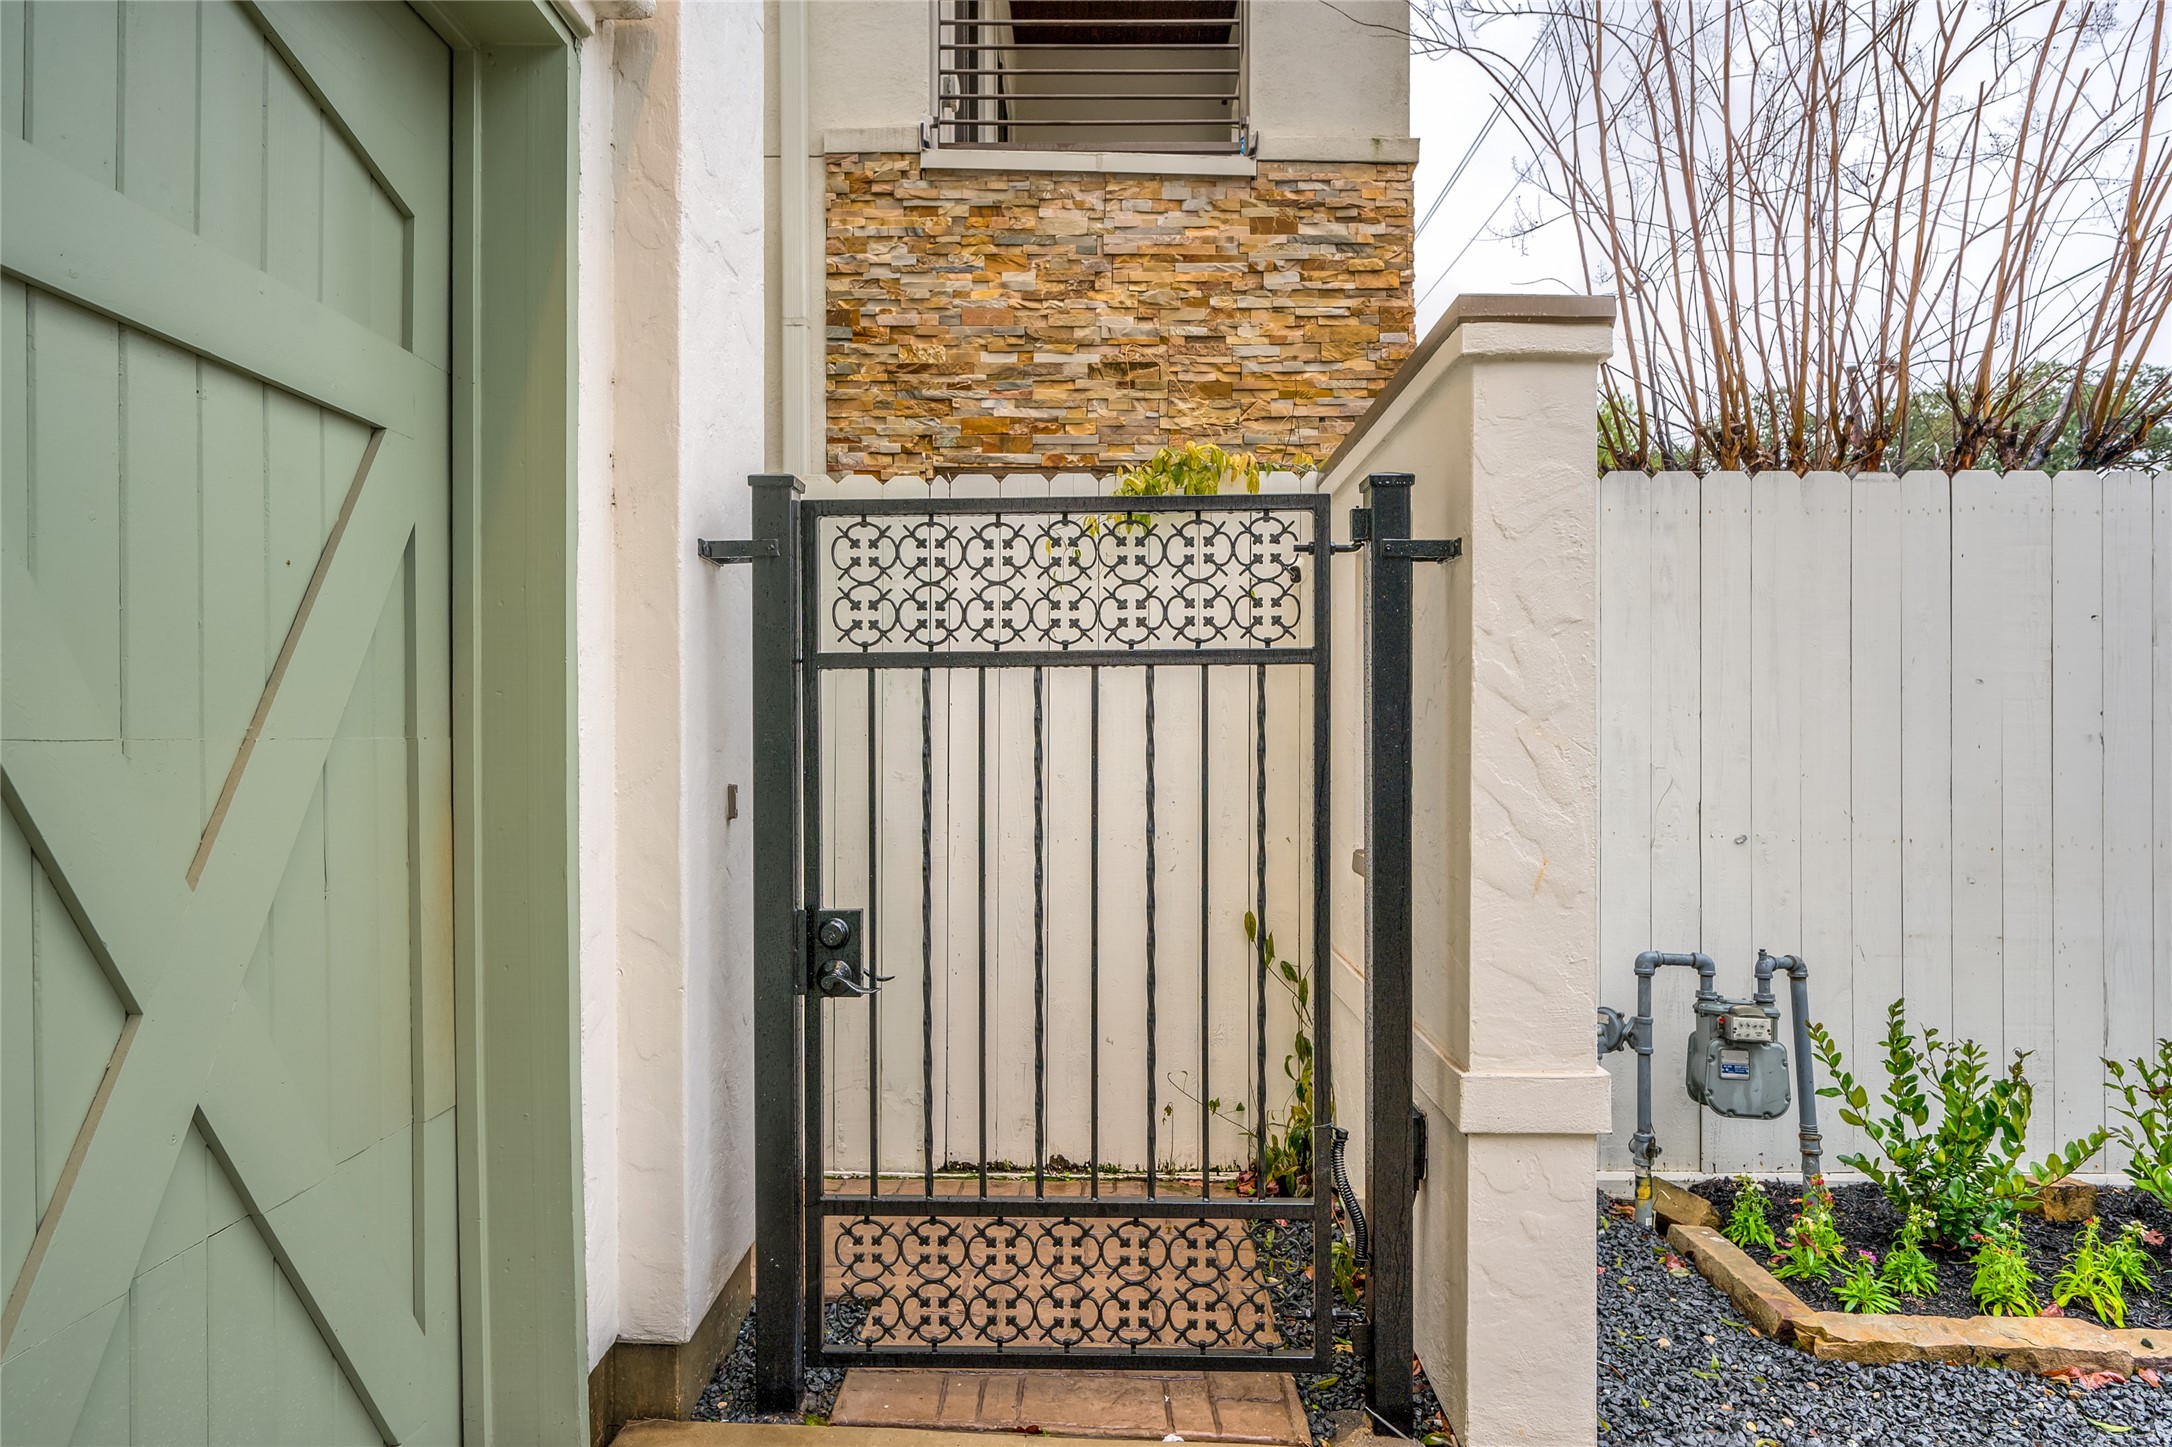 A pretty wrought iron gate & walkway greet you! Fresh landscaping & seasonal color adorn the perimeter of the home.